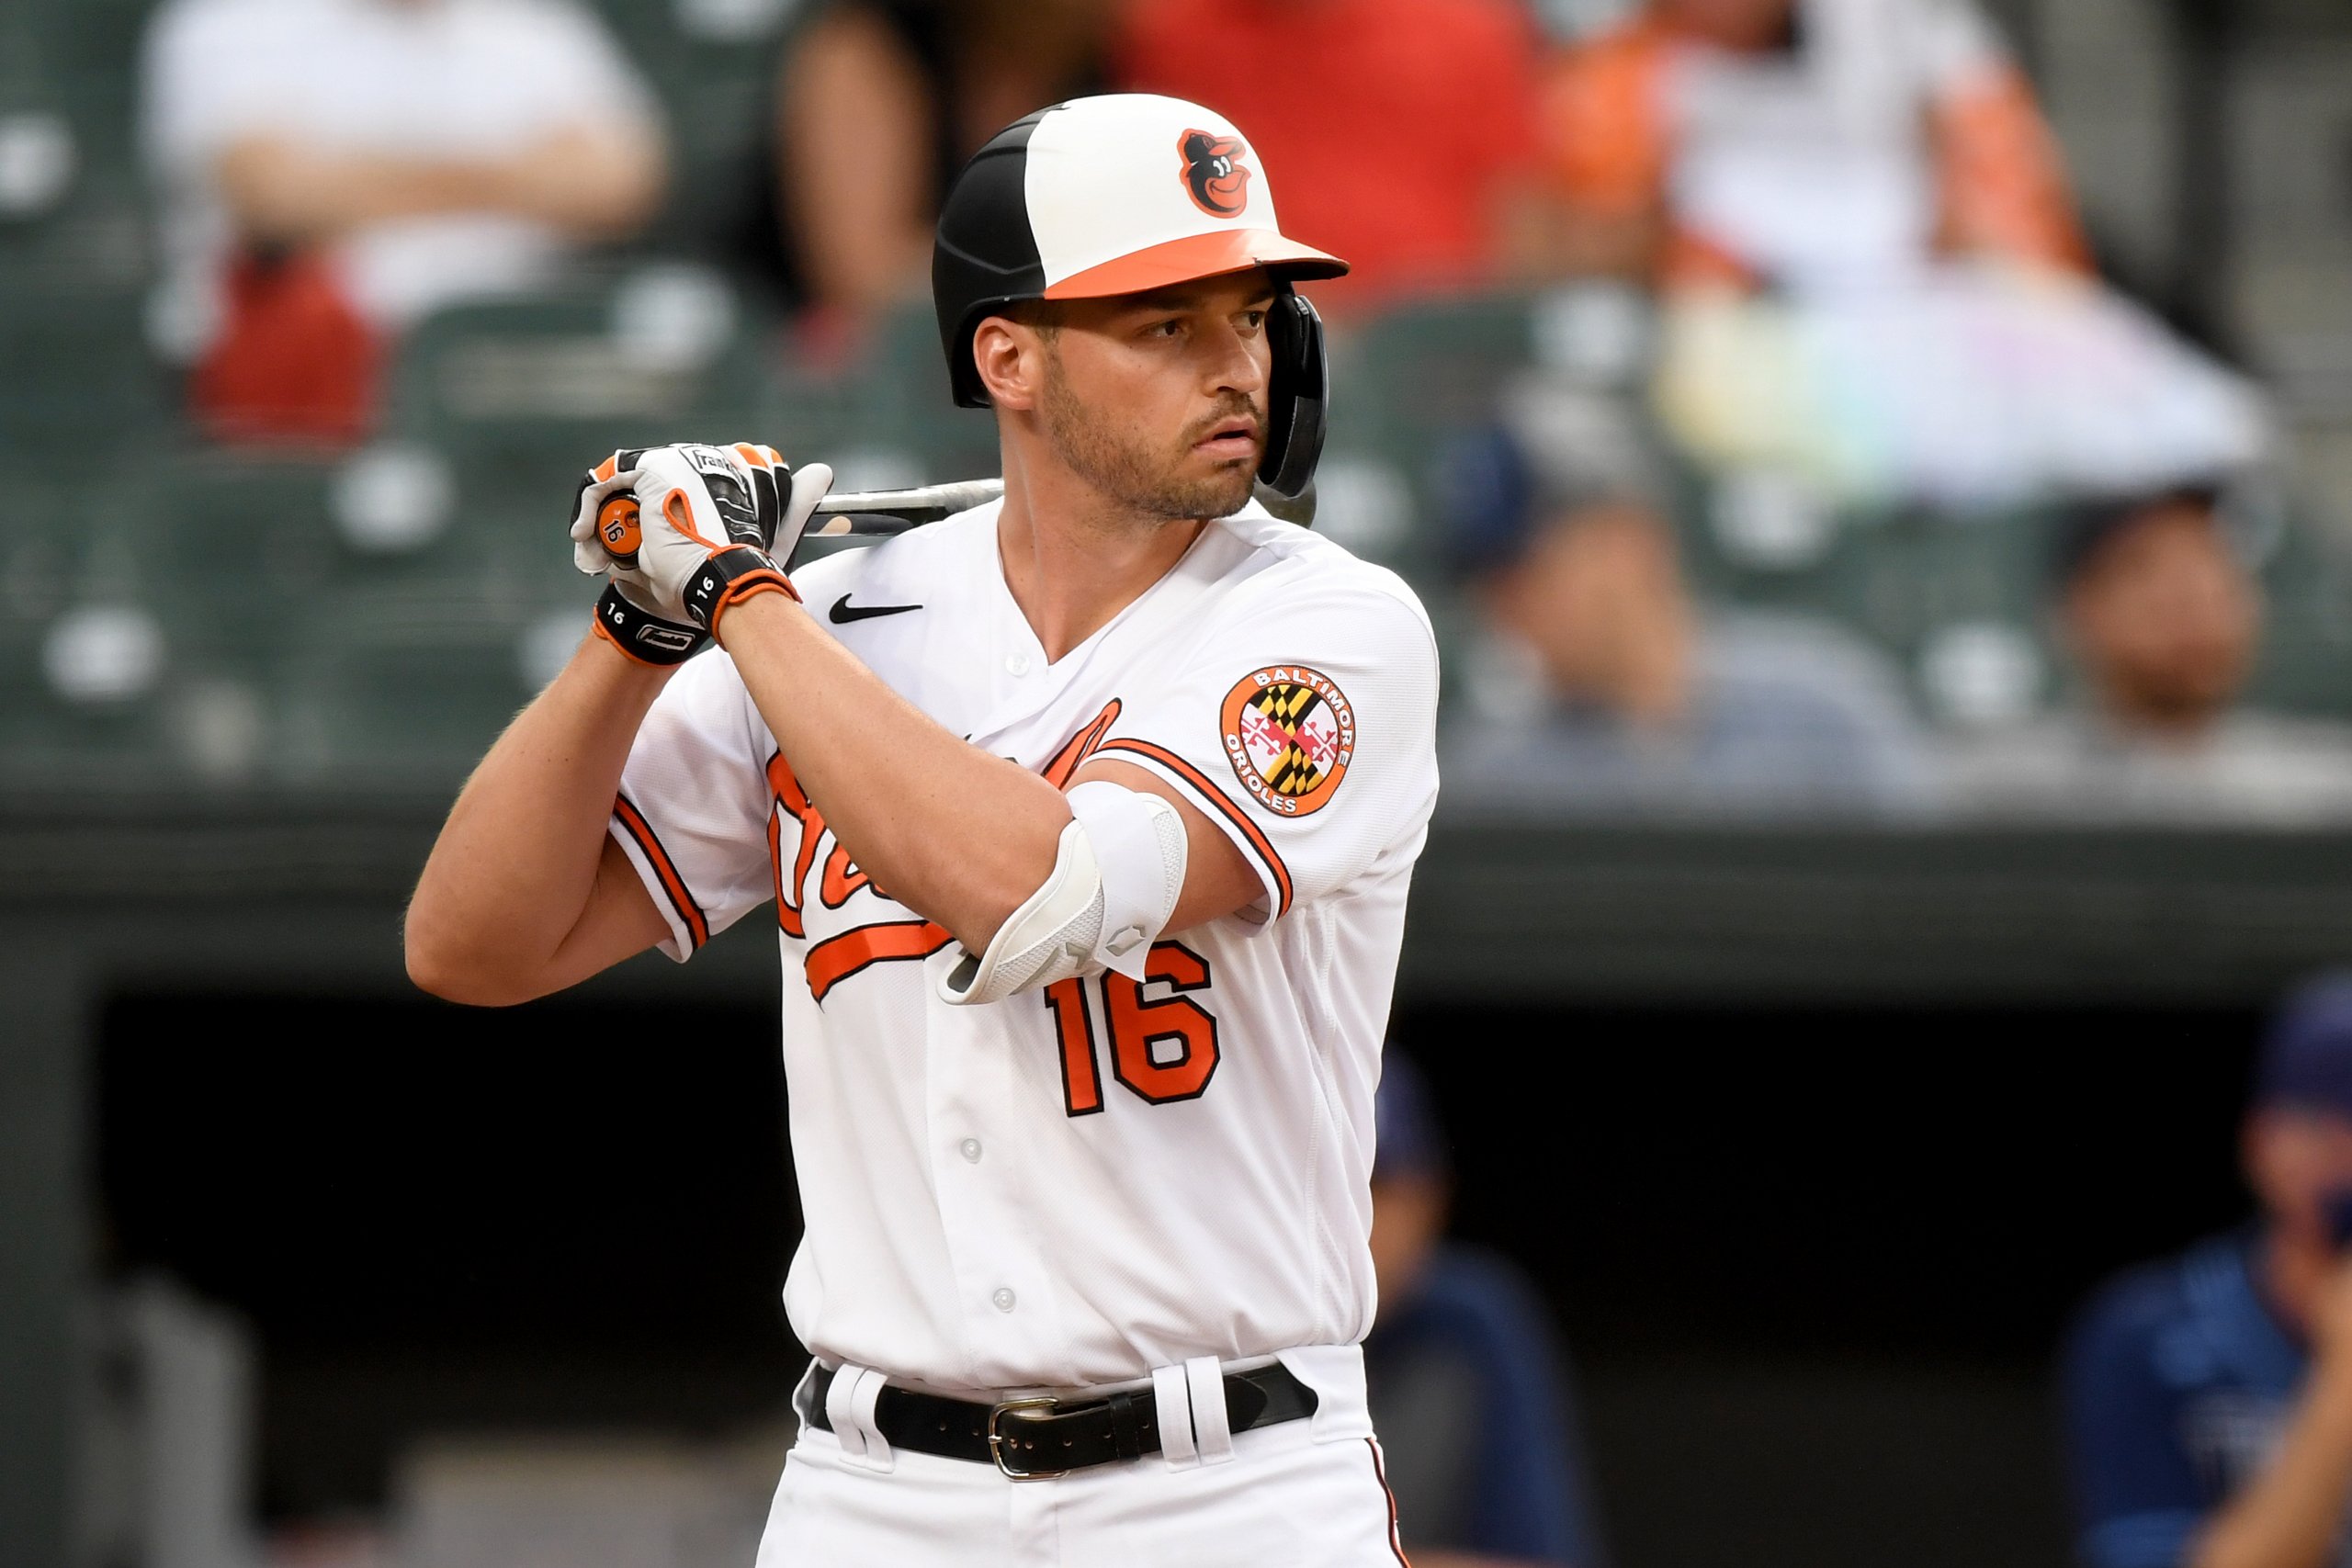 Orioles slugger Trey Mancini says he will undergo chemotherapy for colon  cancer